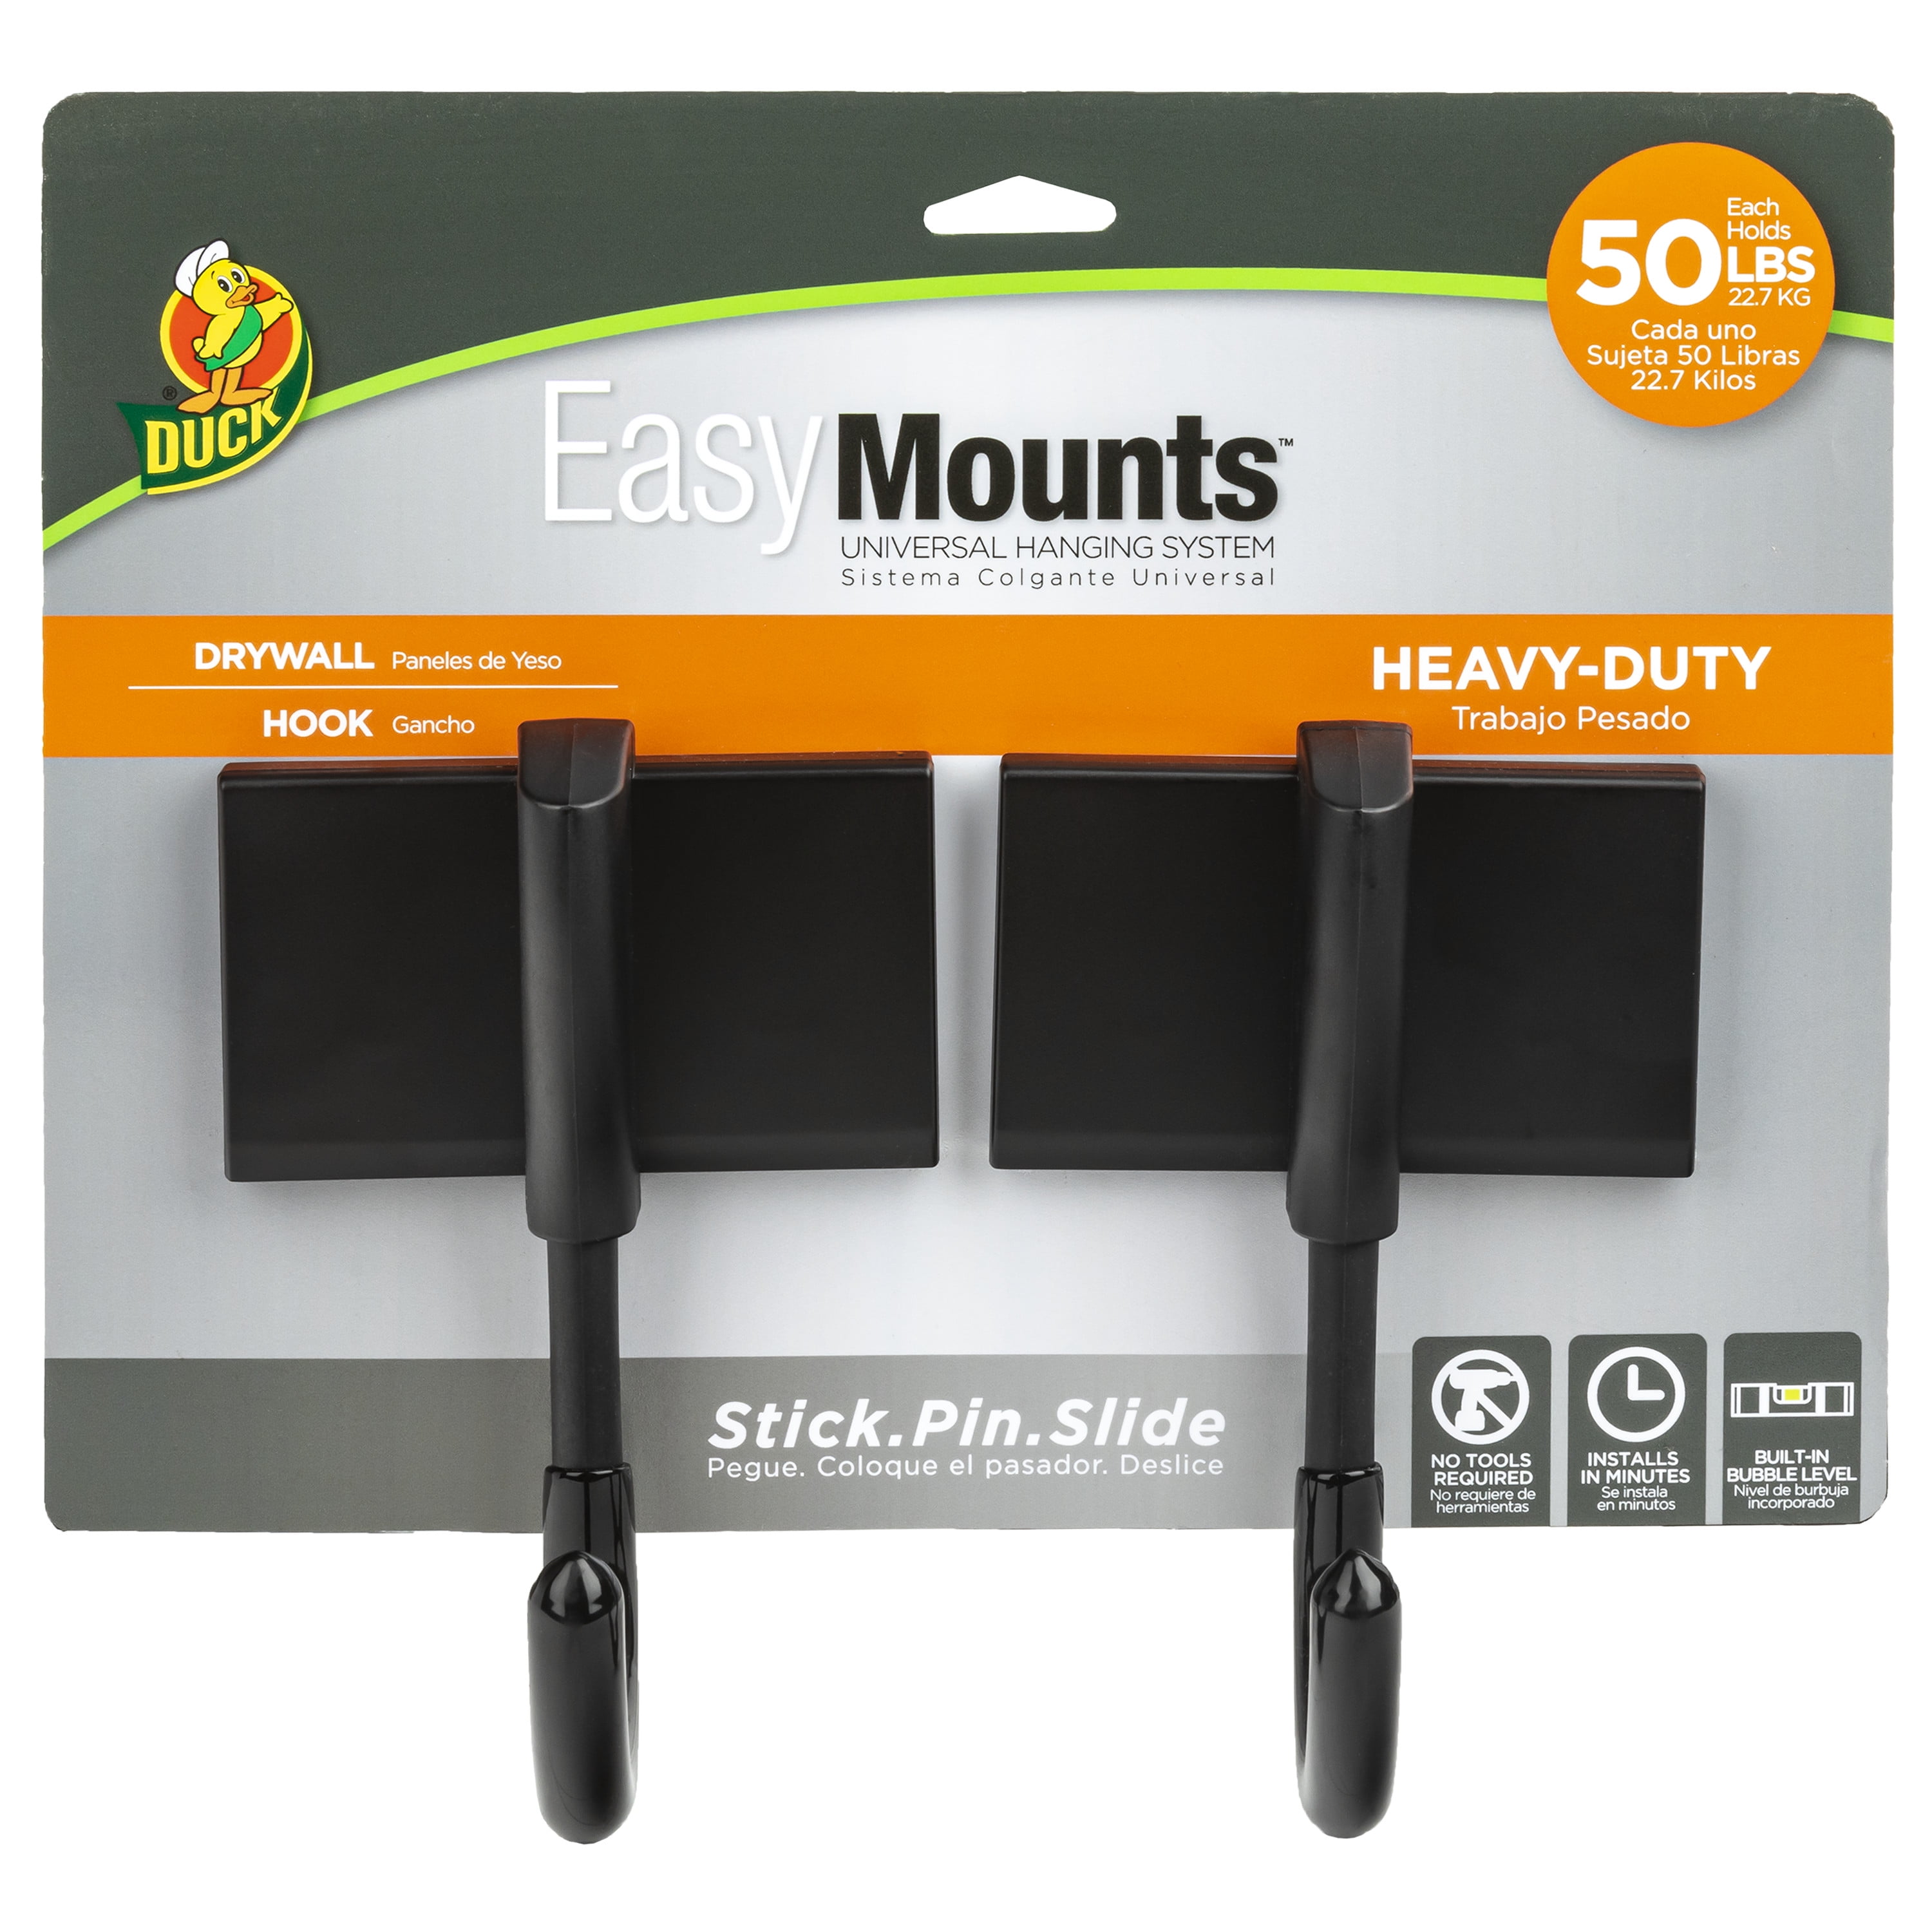 Duck Brand EasyMounts Wall Hook- No Tools Required for Hanging, Heavy-Duty  J-Hooks hold up to 50 lbs, Black, 2-Pack of Drywall Hooks 